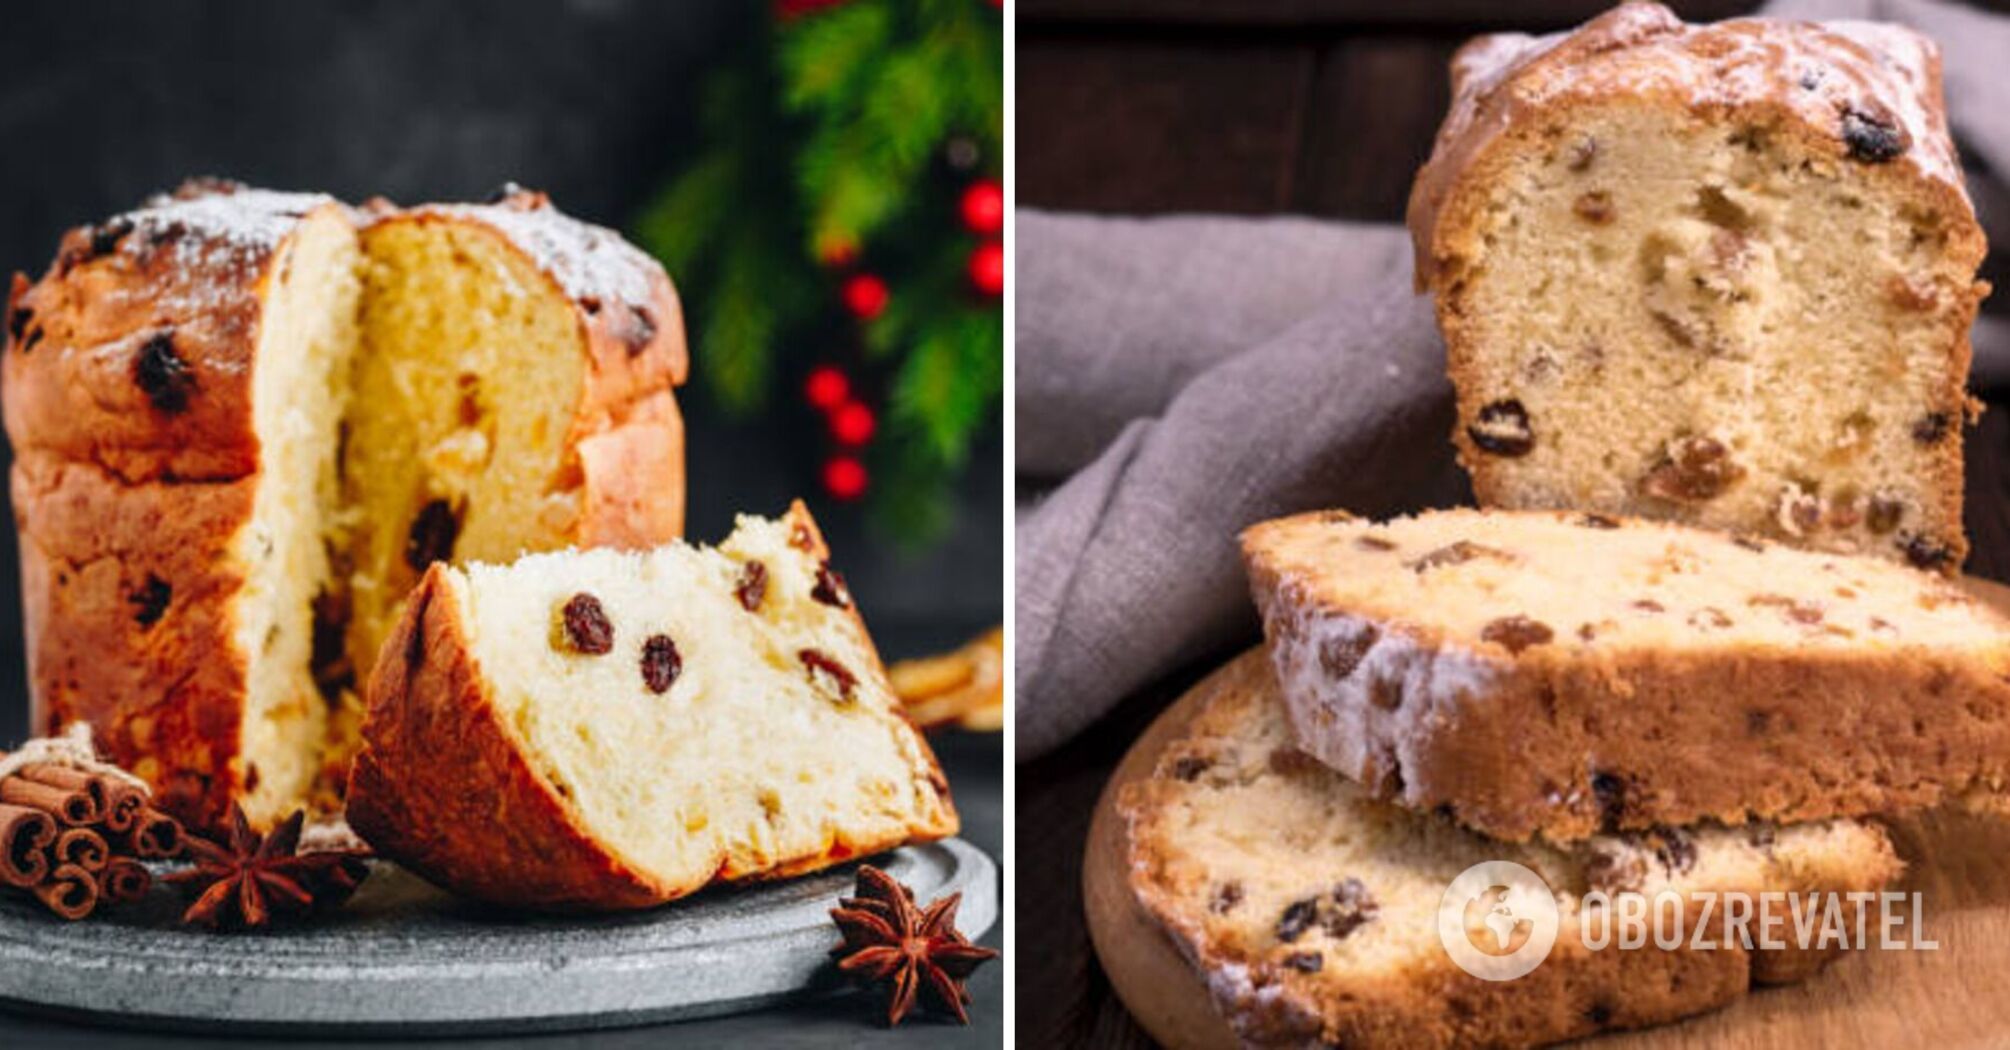 How to easily prepare the popular Italian pastry panettone